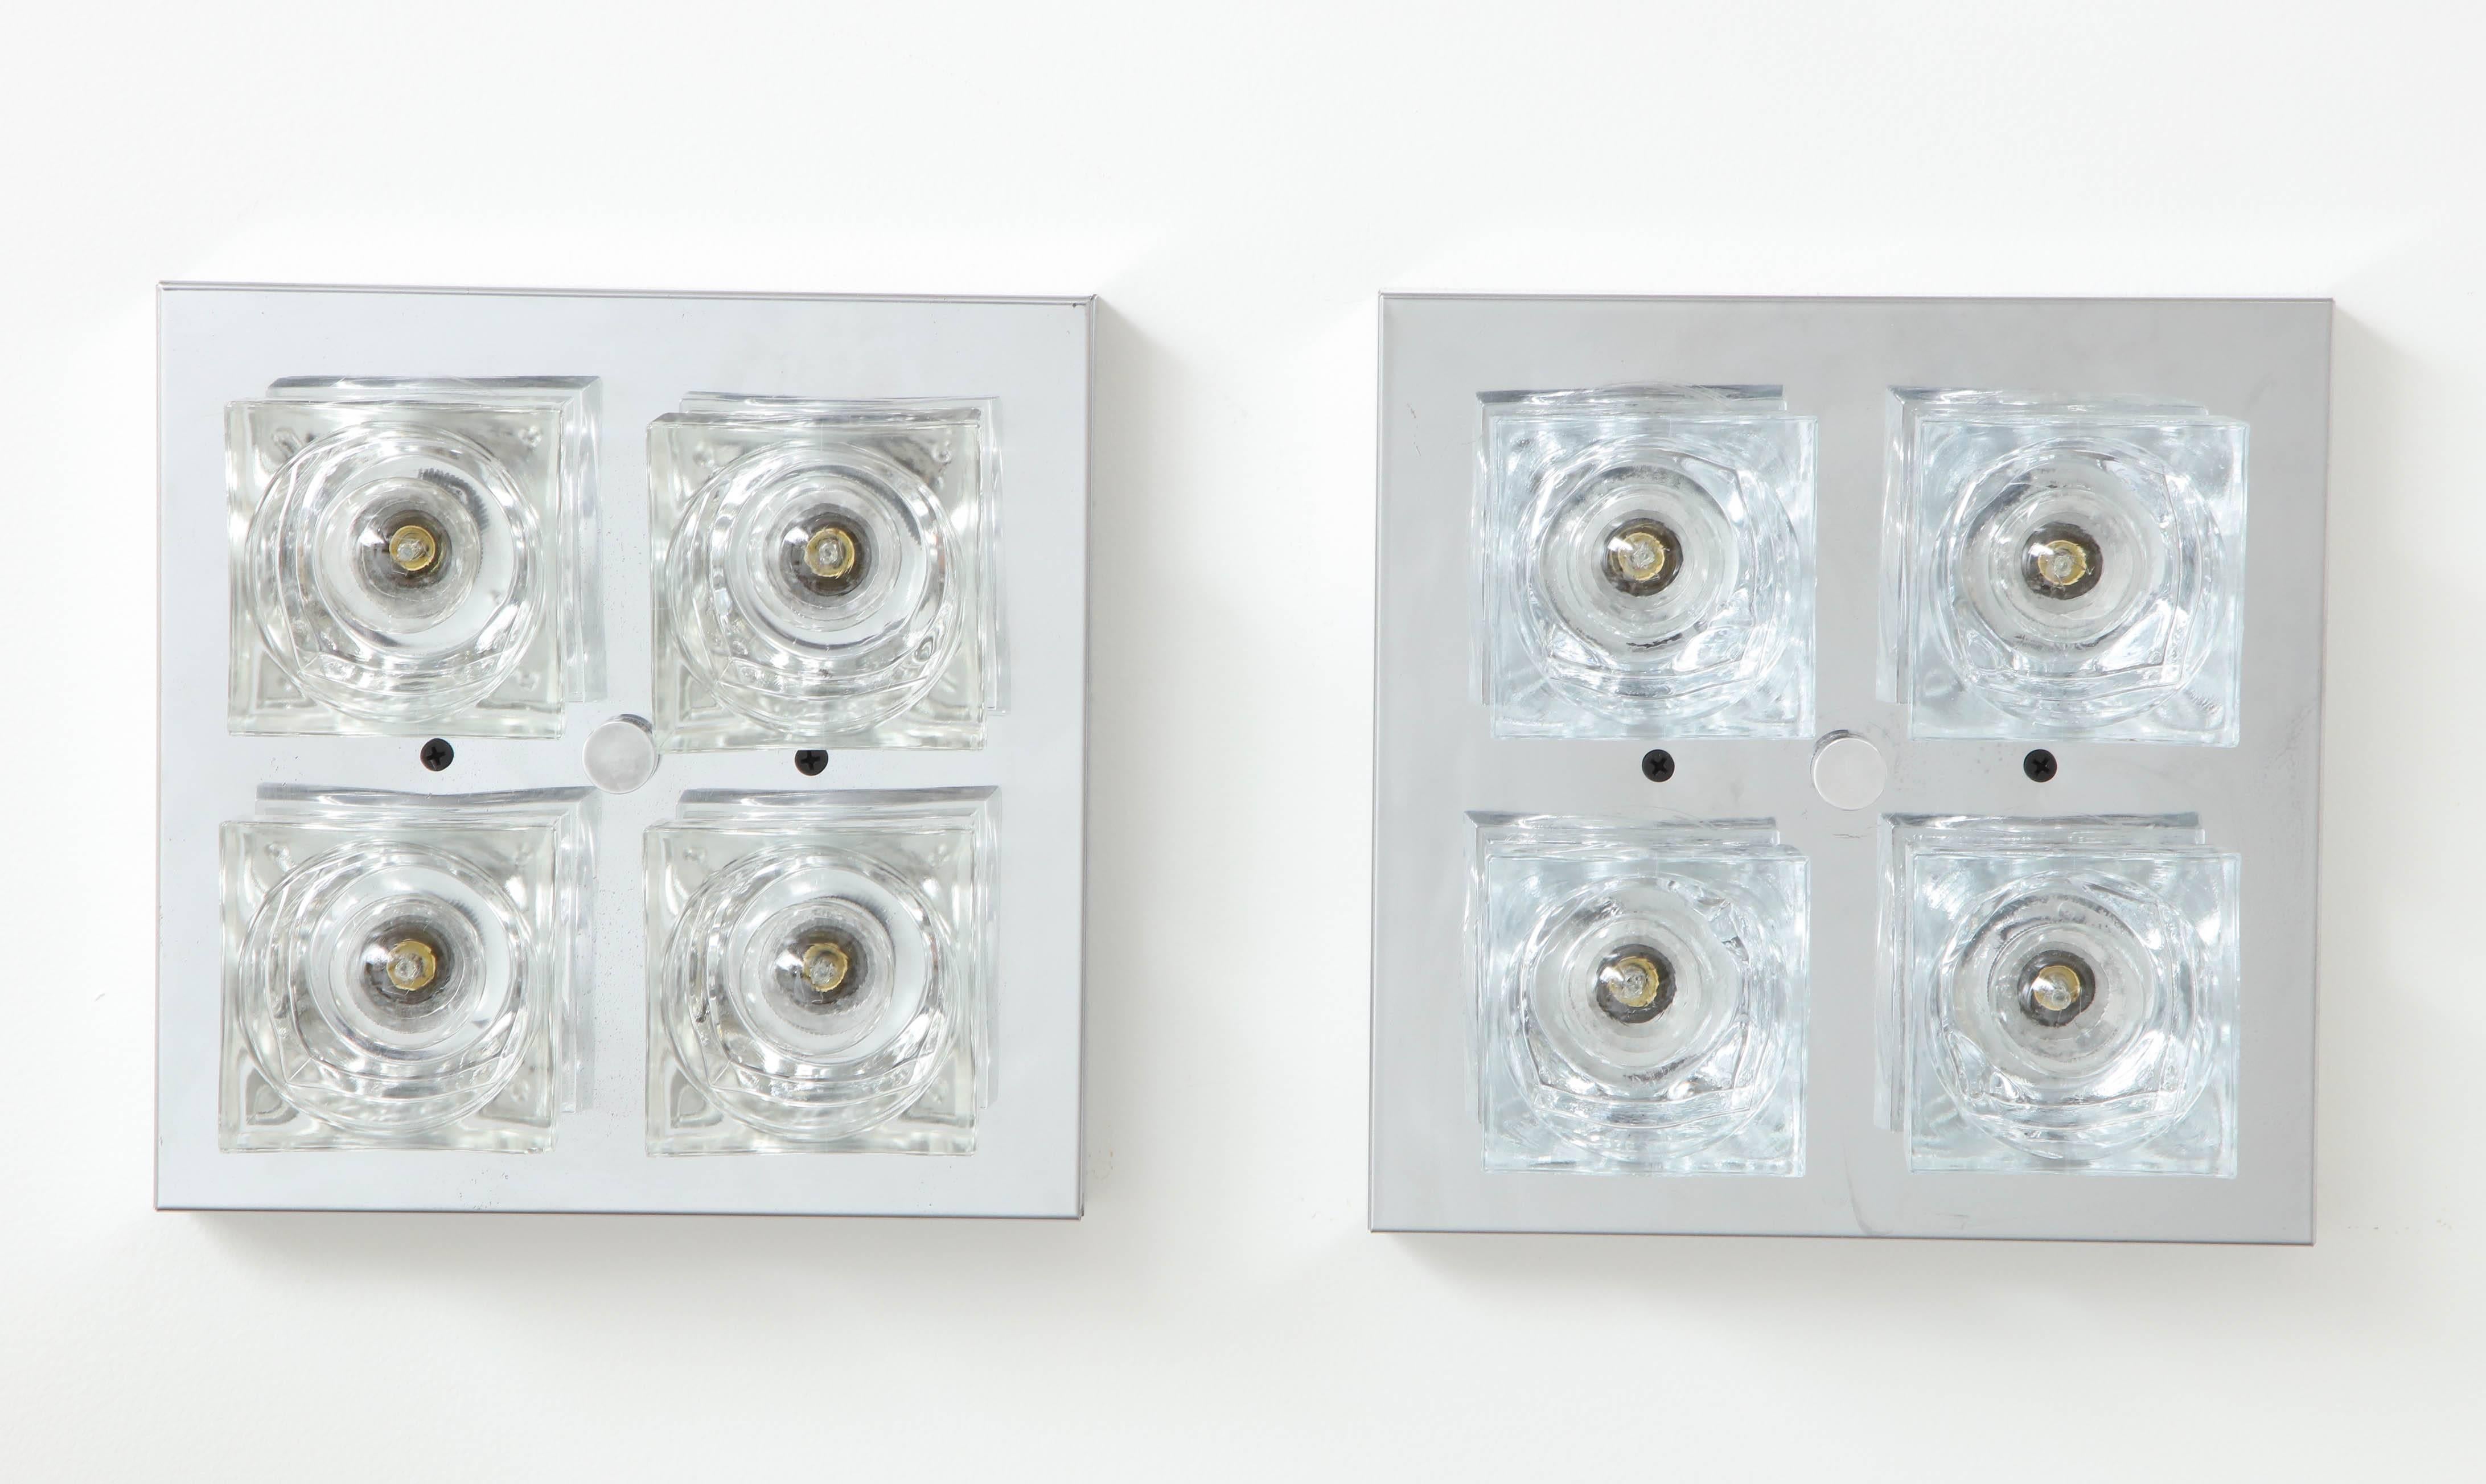 Pair of chrome wall sconces or flush mounts by Sciolari.
The fixtures have been newly rewired for the US each taking a candelabra light bulb with a 25 watt max totaling 100 watts per fixture.
The fixtures are in great vintage condition.